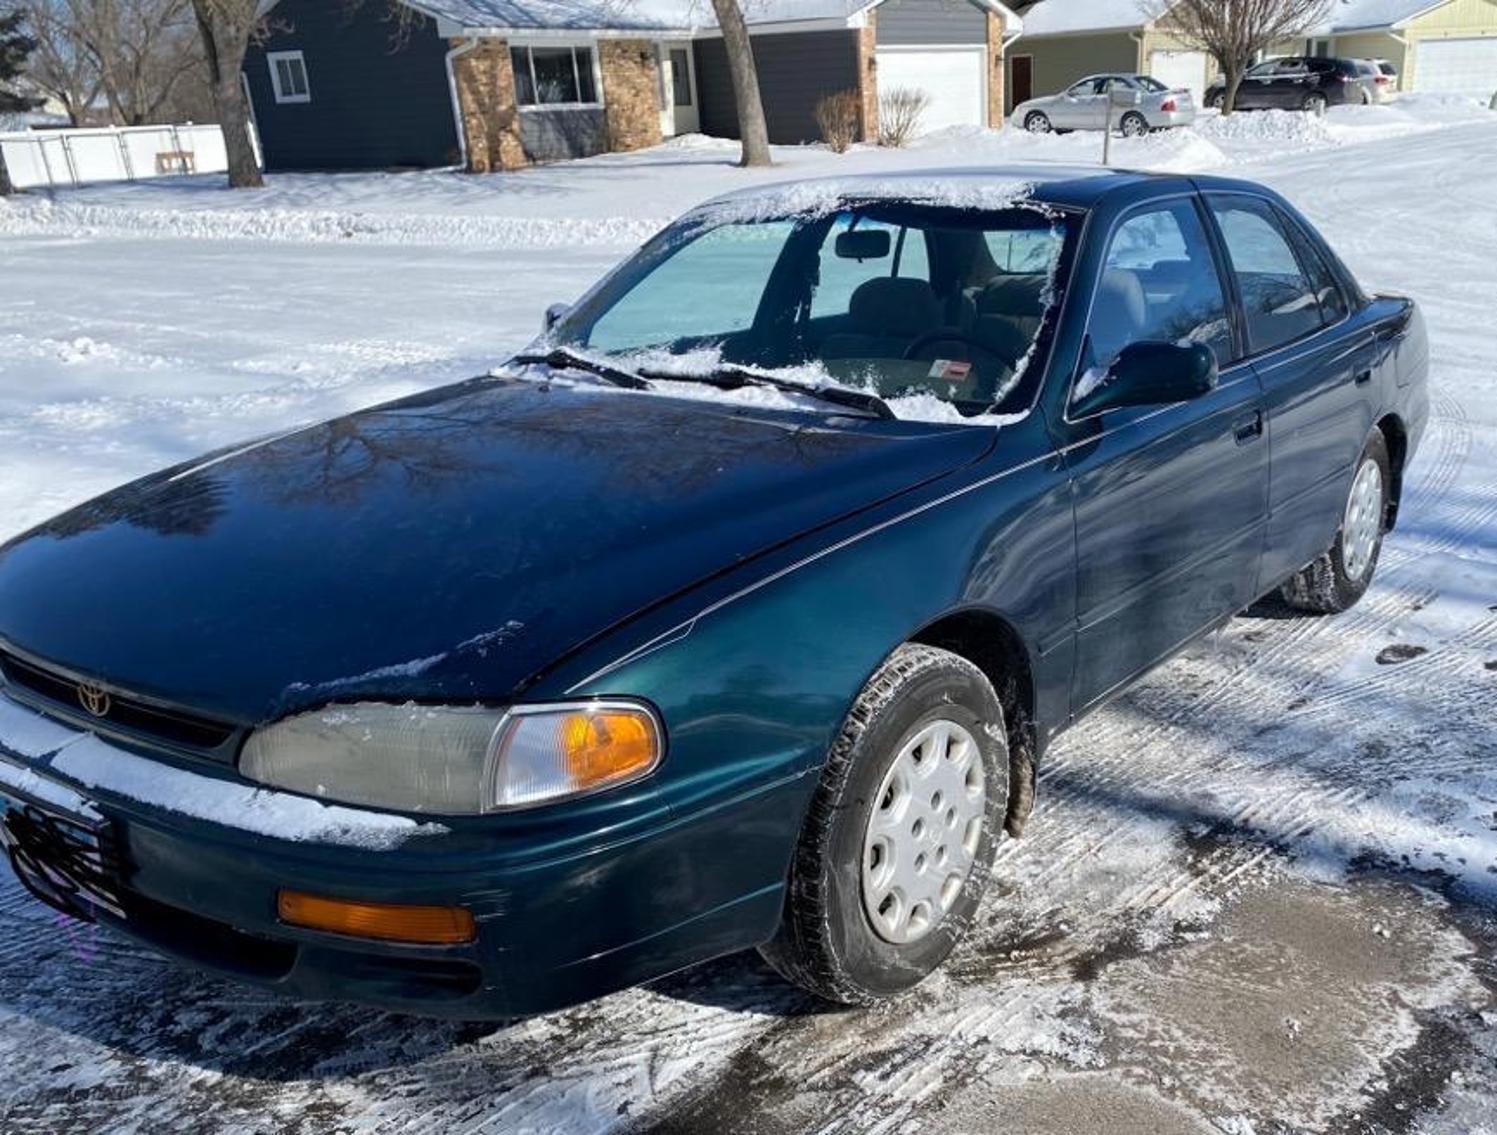 1996 Toyota Camry, Firearms, Dixie Chopper, Coins, Sports Cards and More: Walker, MN